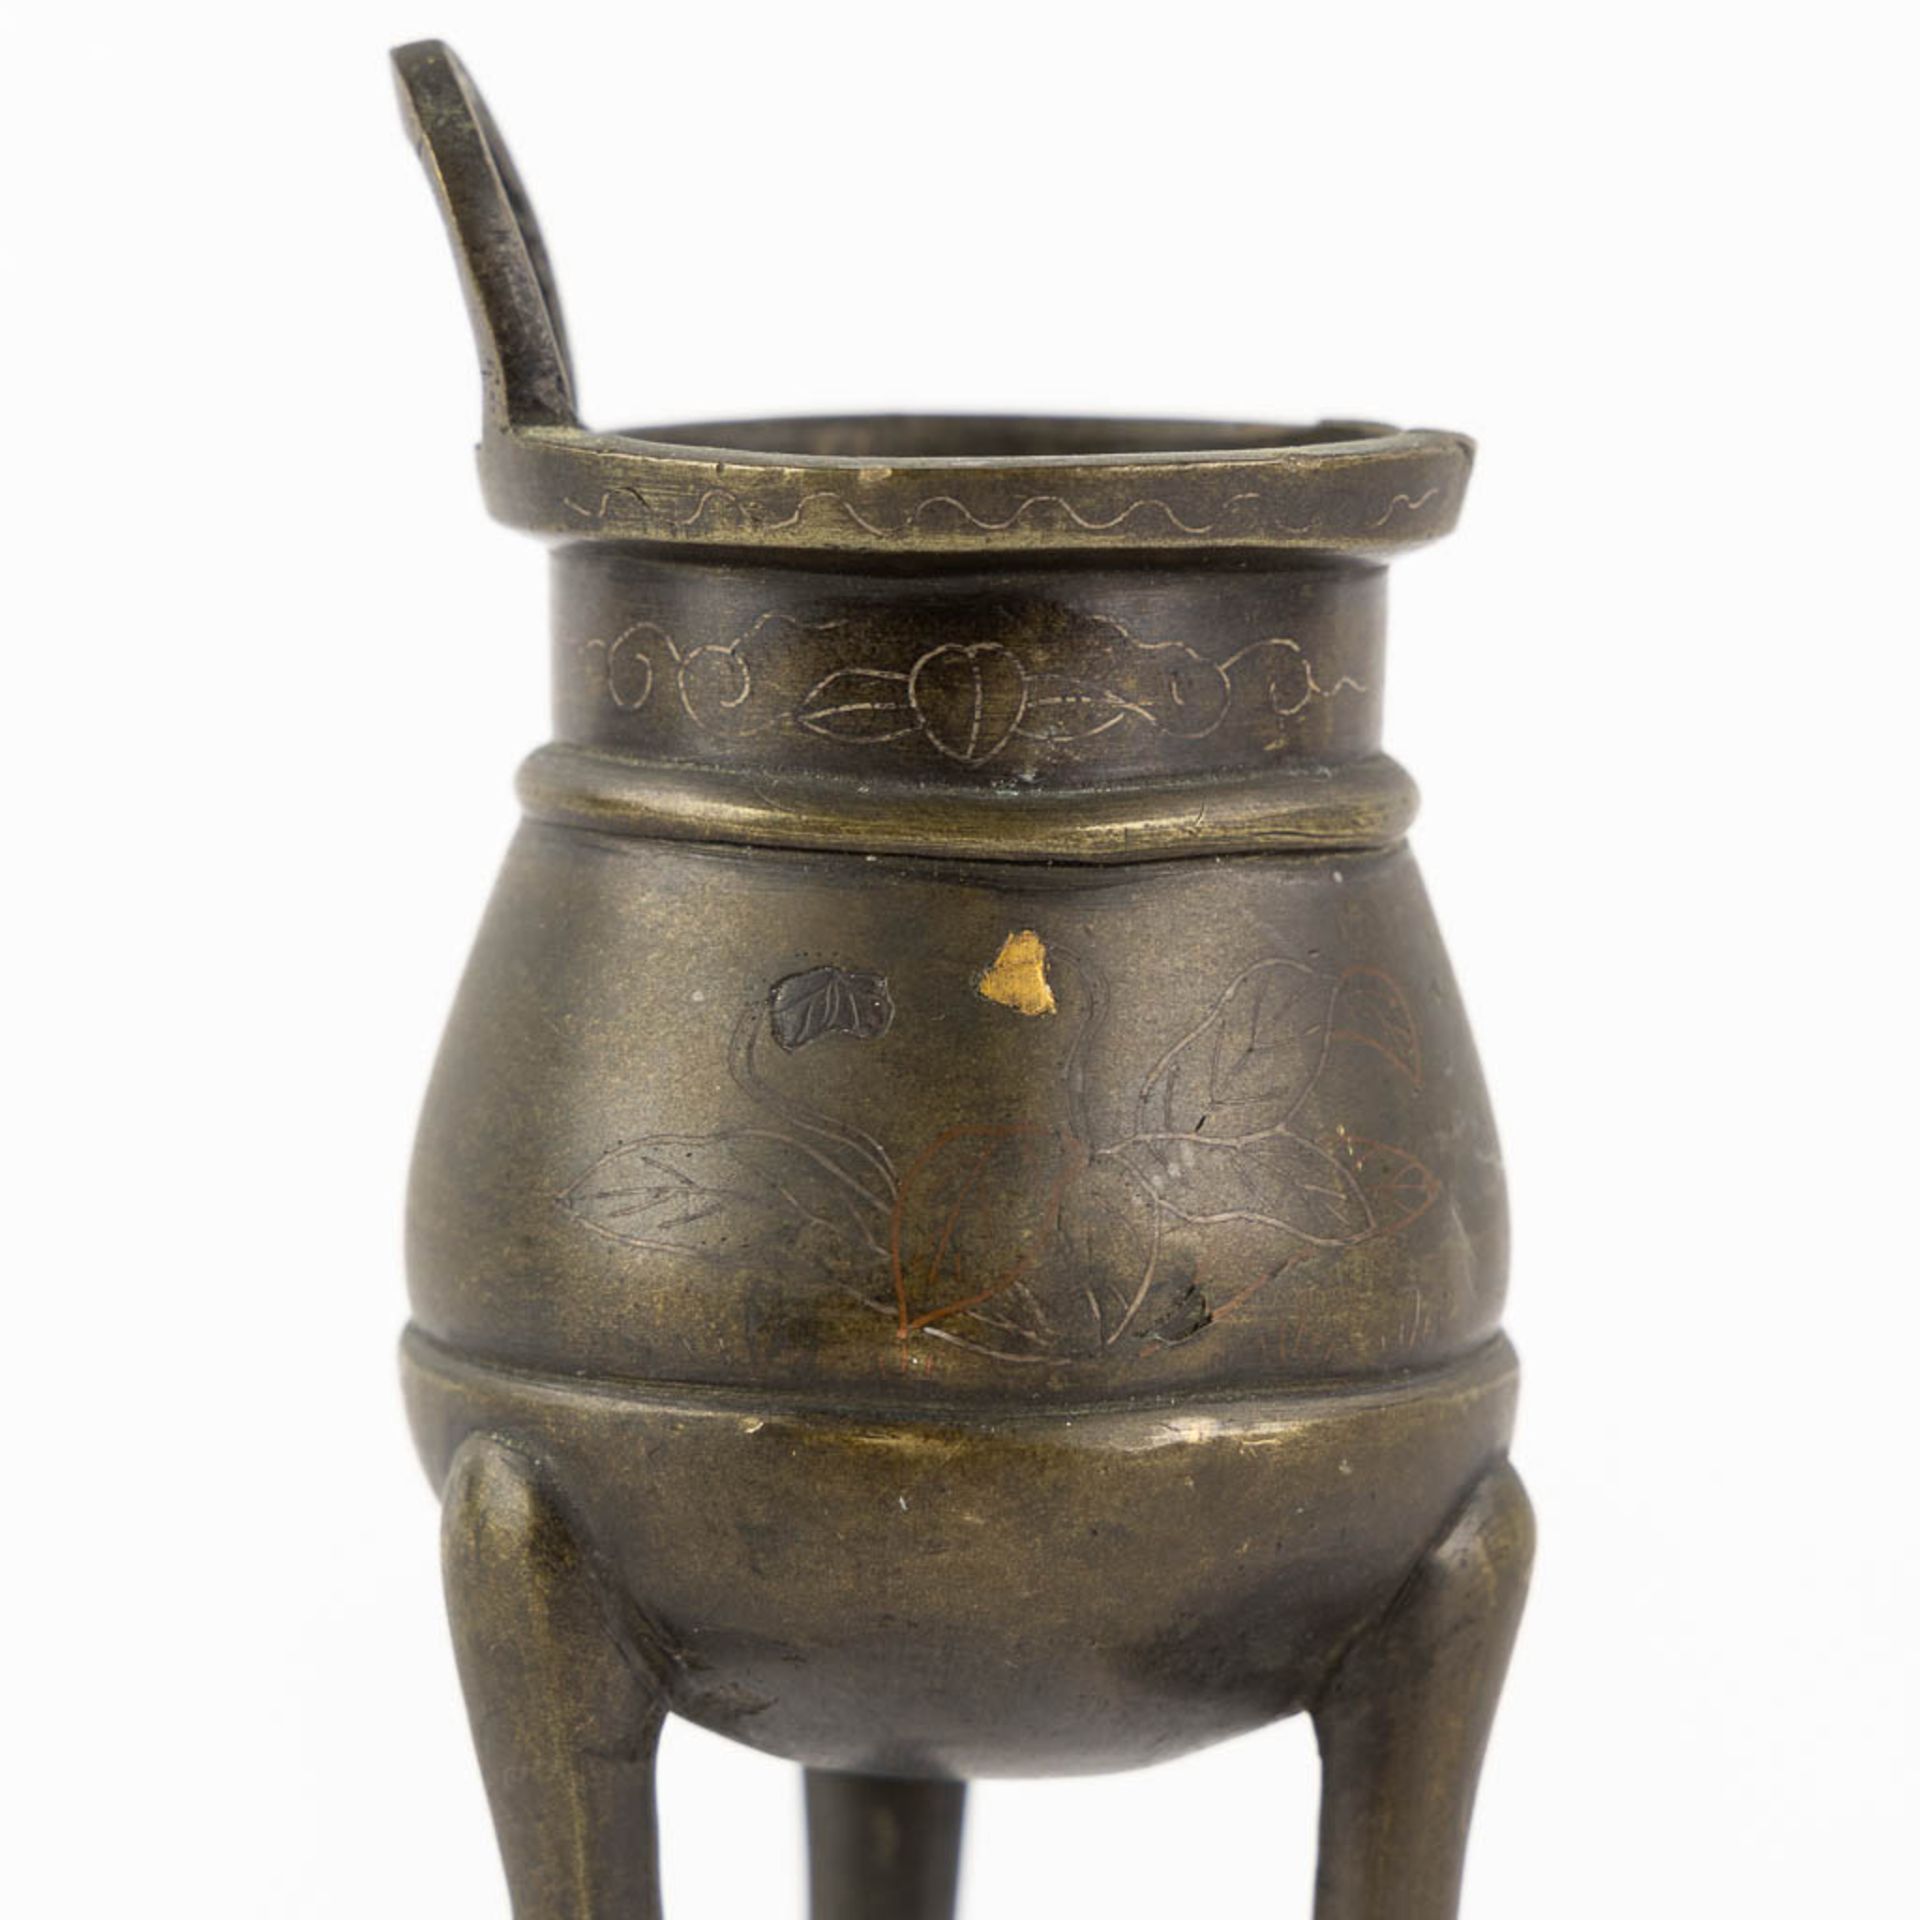 A Chinese insence burner, vase and a lucky coin. Bronze. (H:19 x D:5 cm) - Bild 17 aus 19